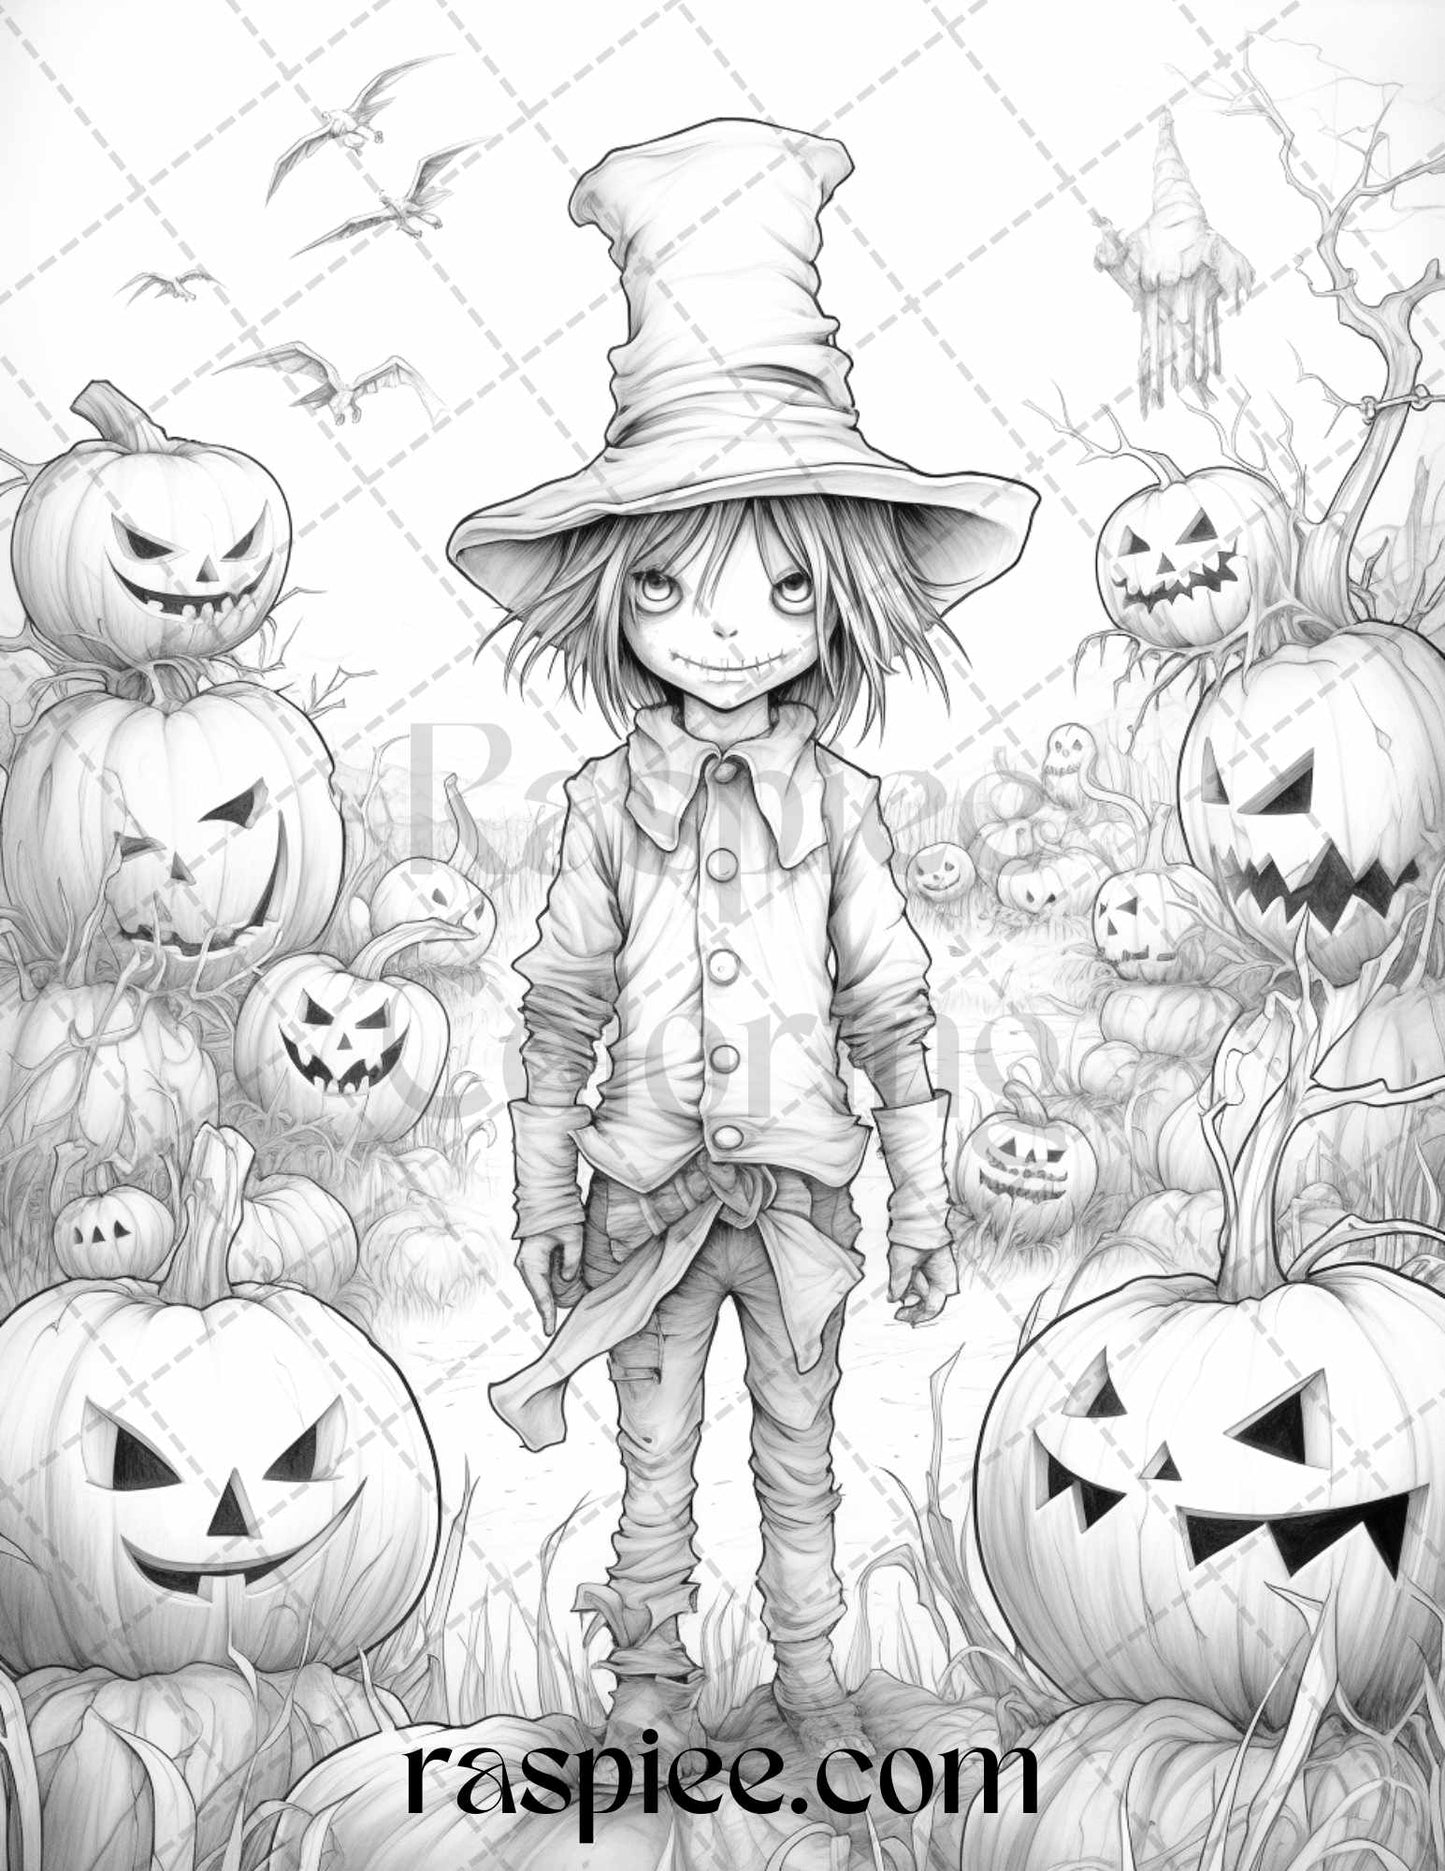 Halloween Scarecrow Coloring Page, Printable Halloween Coloring Book, Grayscale Scarecrow Designs, Adult Coloring Pages, DIY Halloween Decorations, Halloween Coloring Pages for Adults, Halloween Coloring Sheets, Halloween Grayscale Coloring Pages